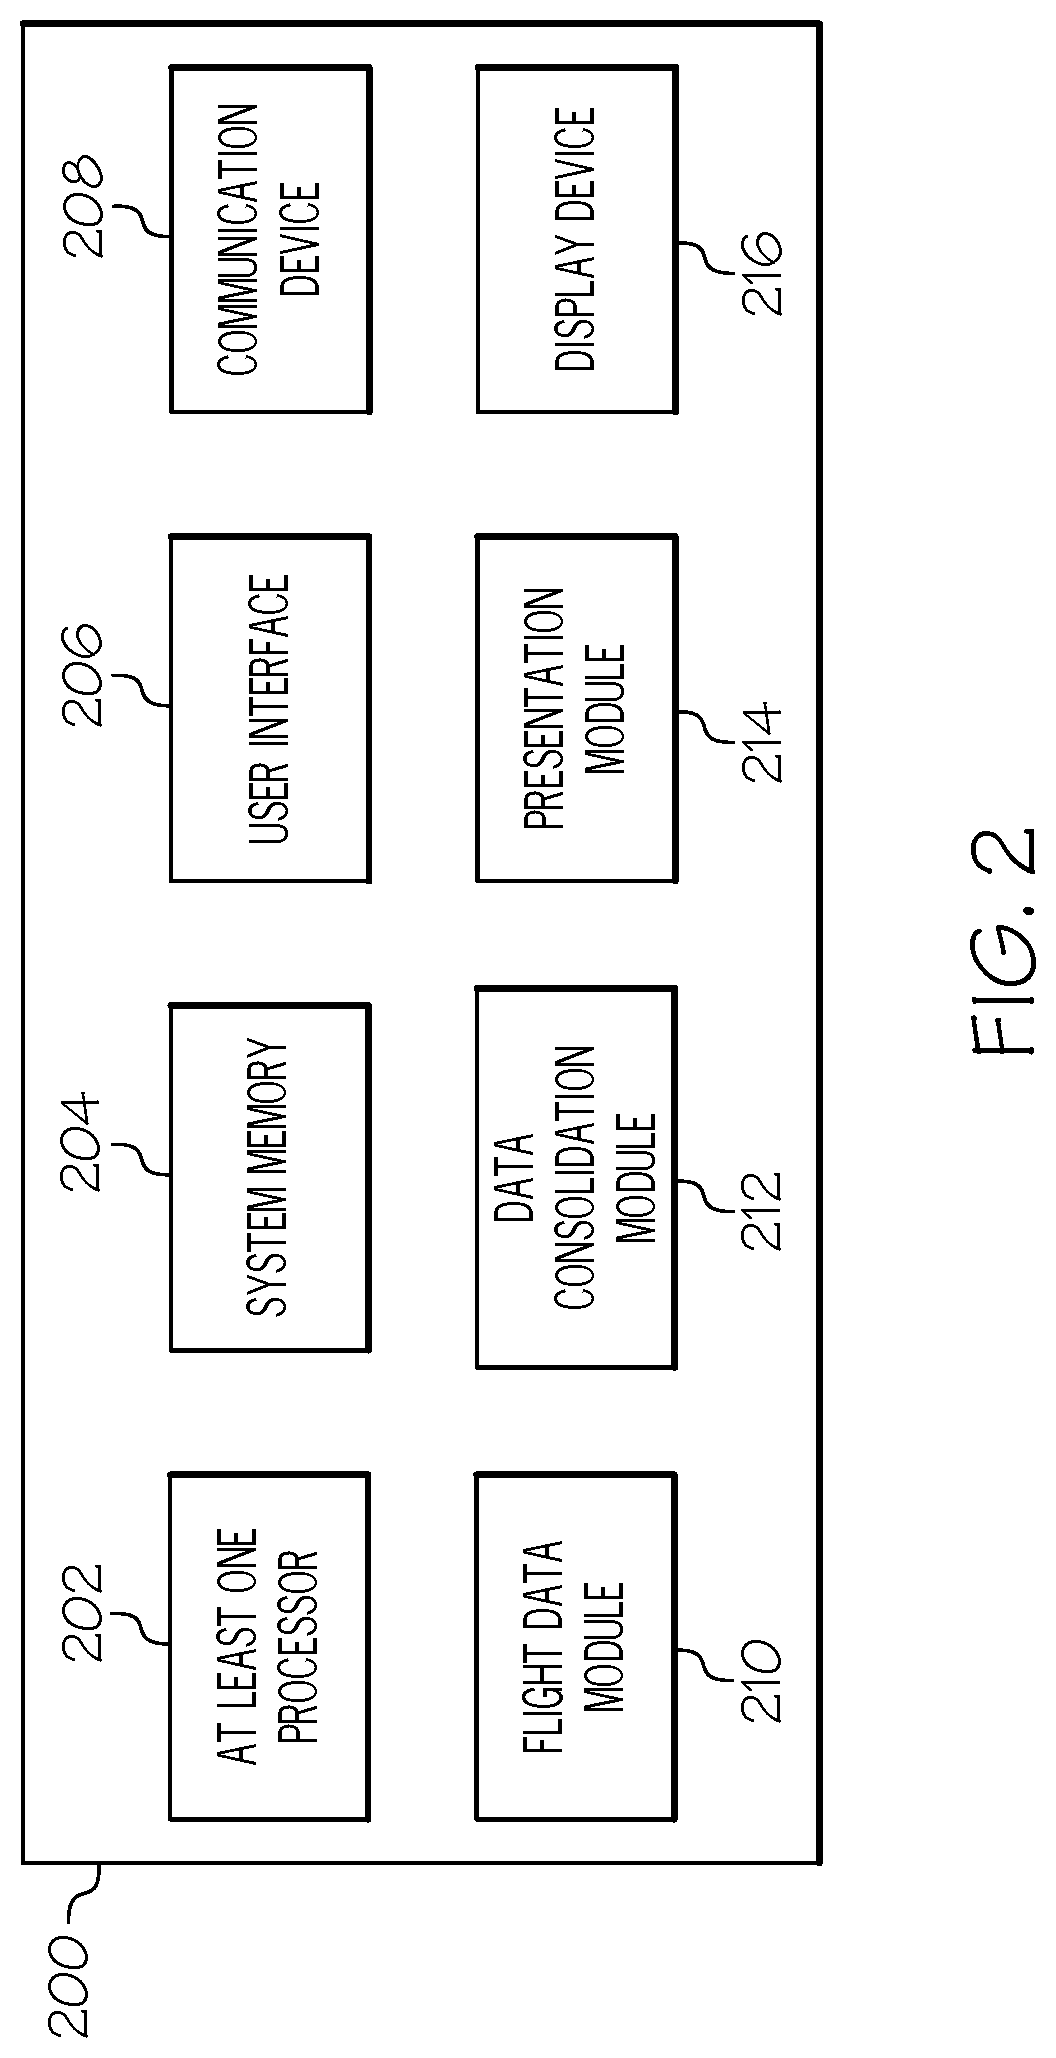 Systems and methods for presenting an intuitive timeline visualization via an avionics primary flight display (PFD)